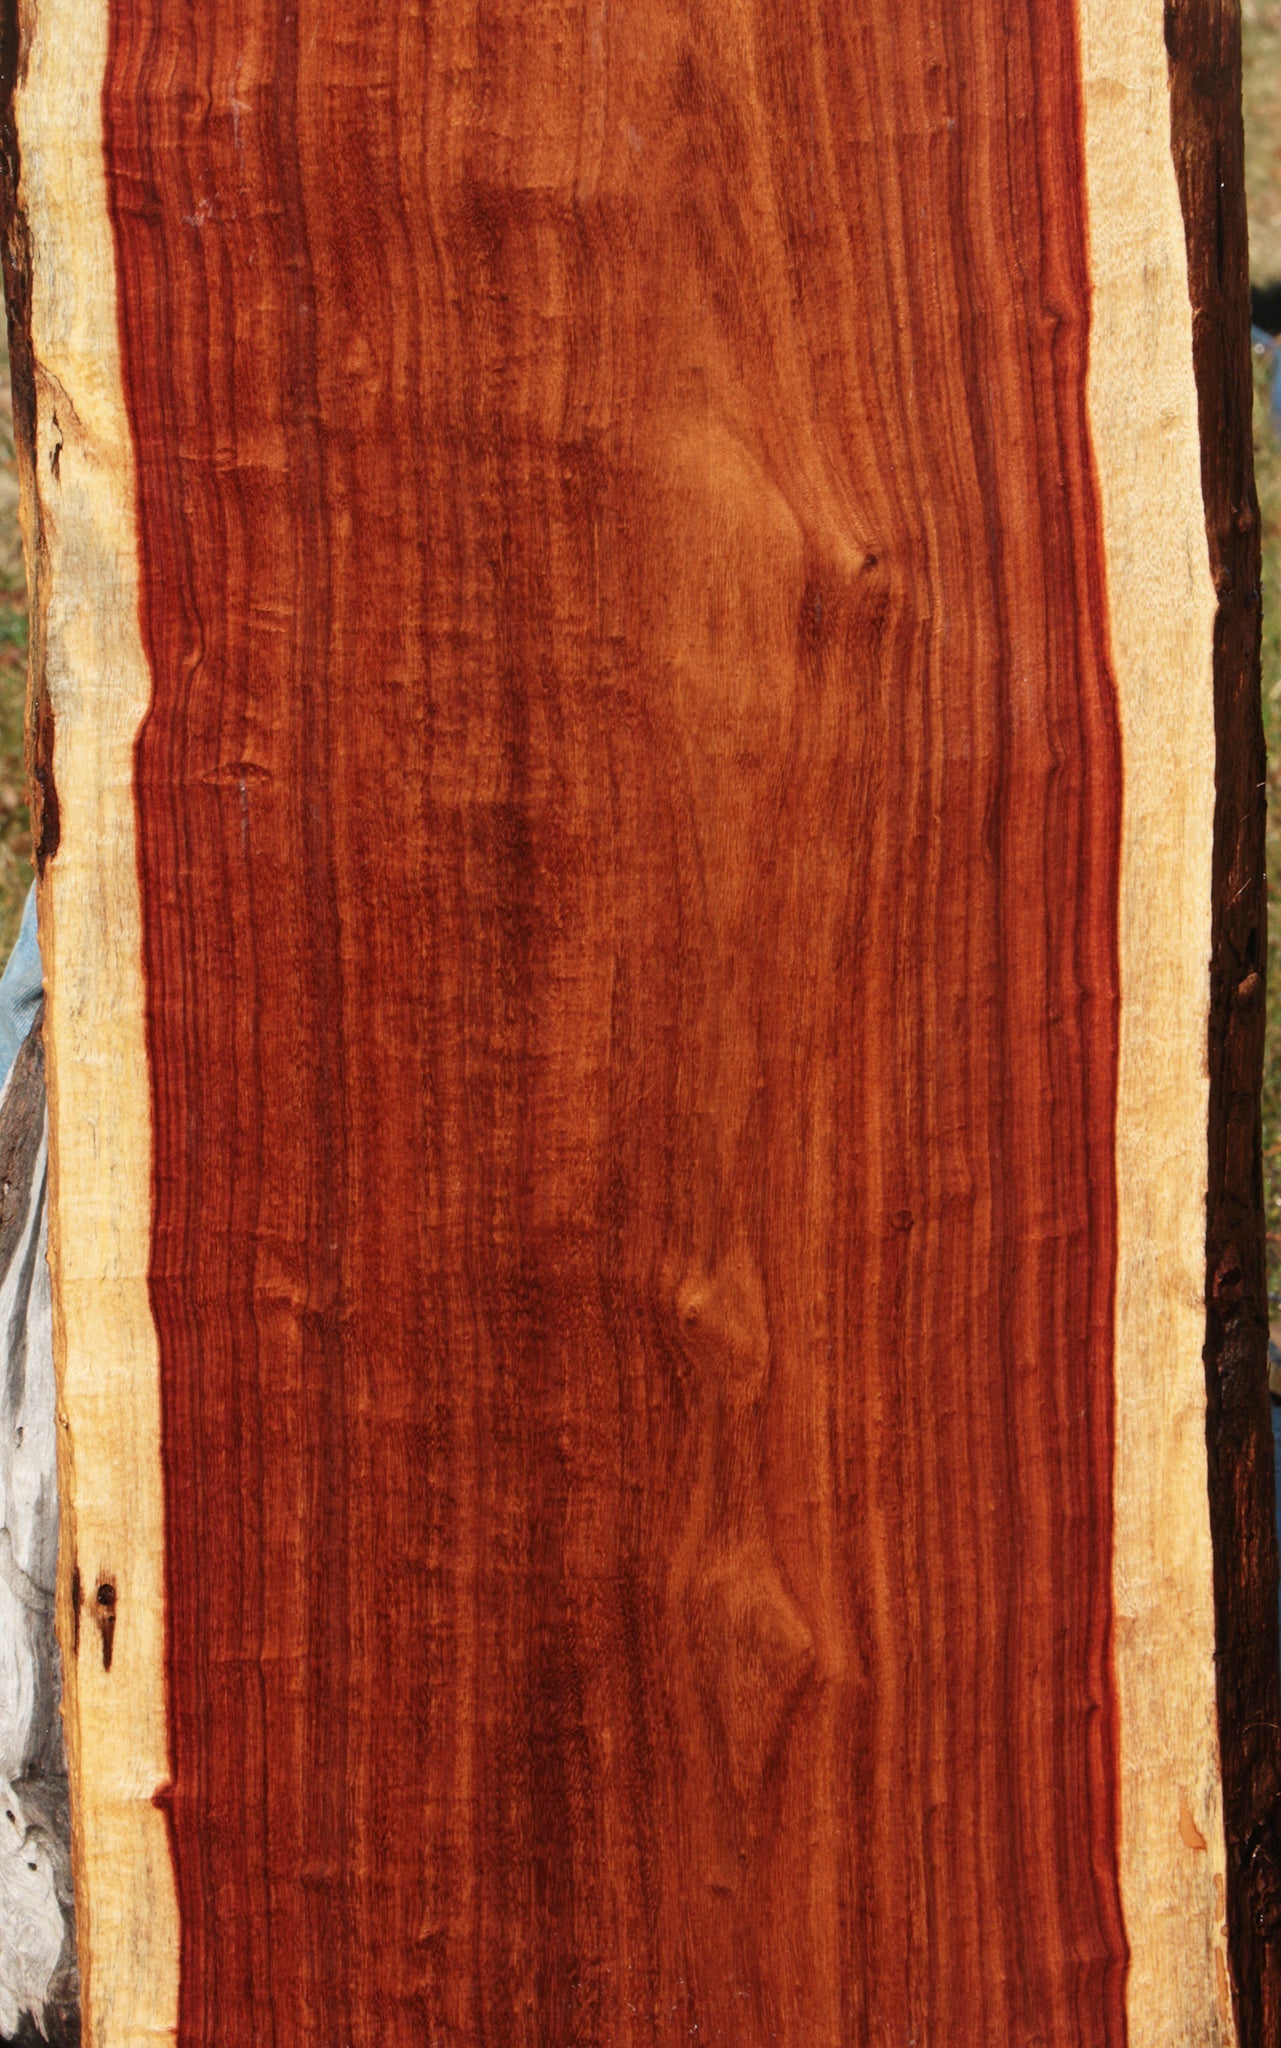 Granadillo Live Edge Lumber (Free Shipping Excluded)